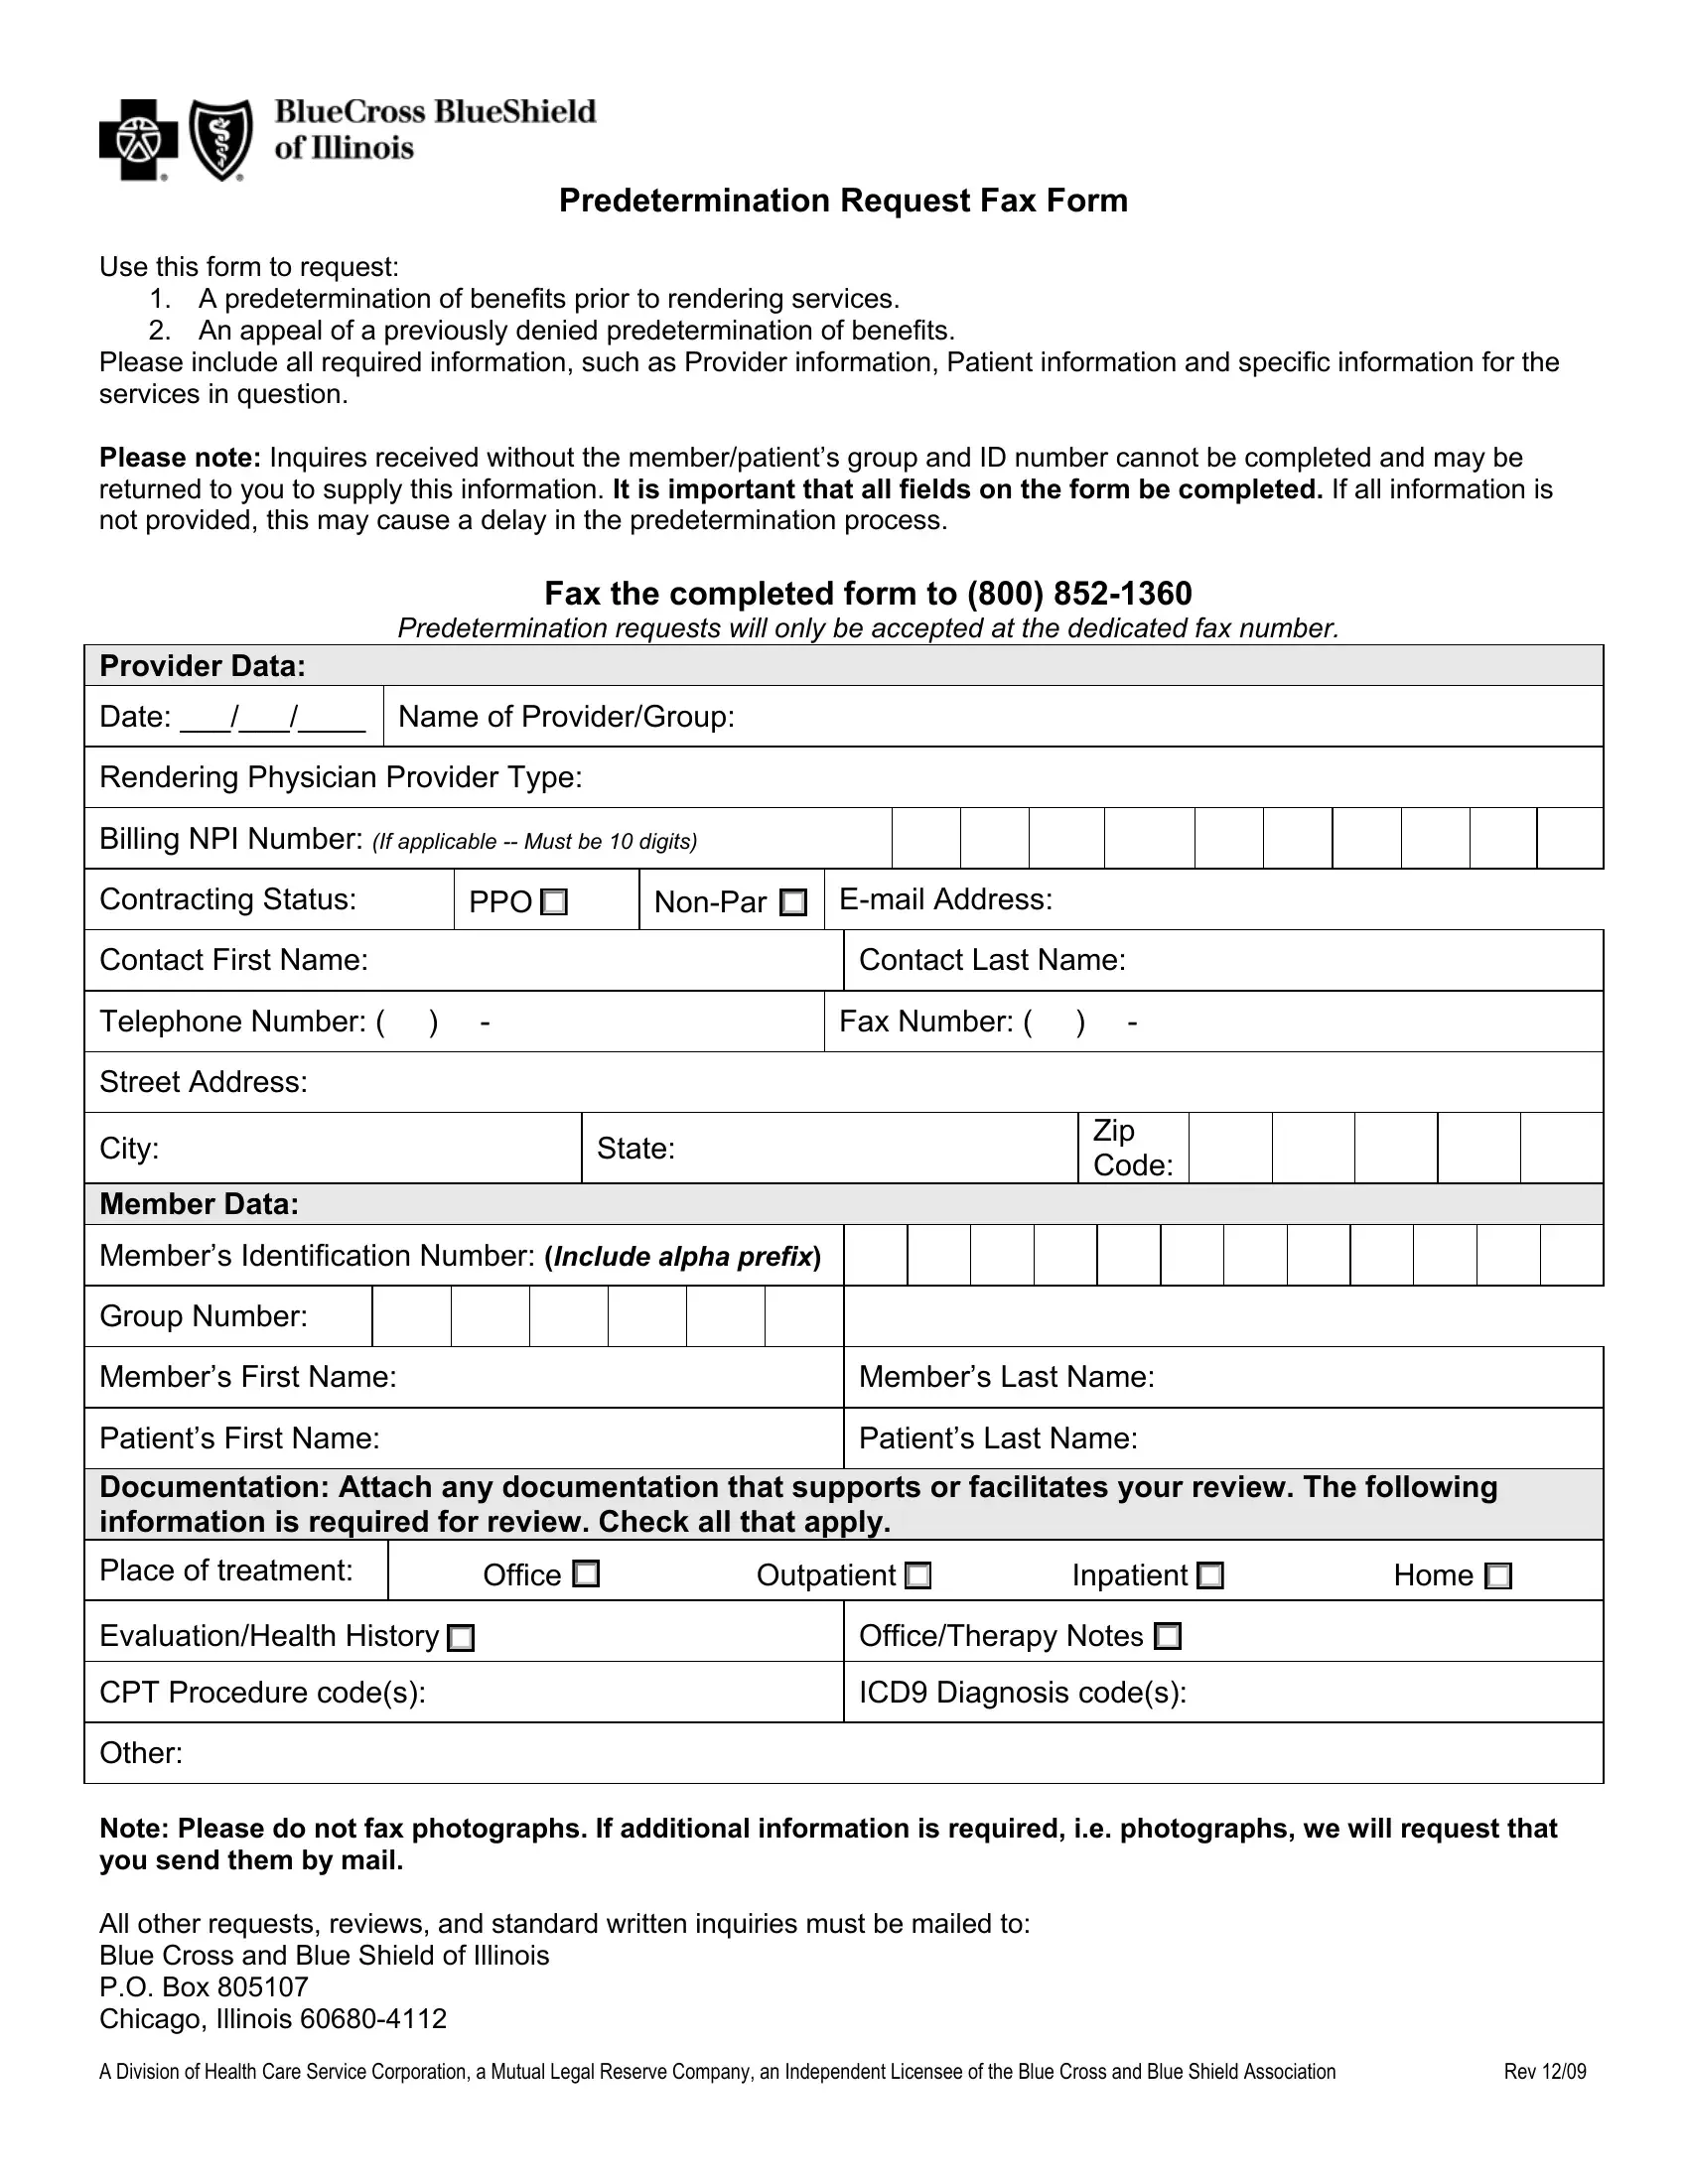 bcbs-predetermination-form-fill-out-printable-pdf-forms-online